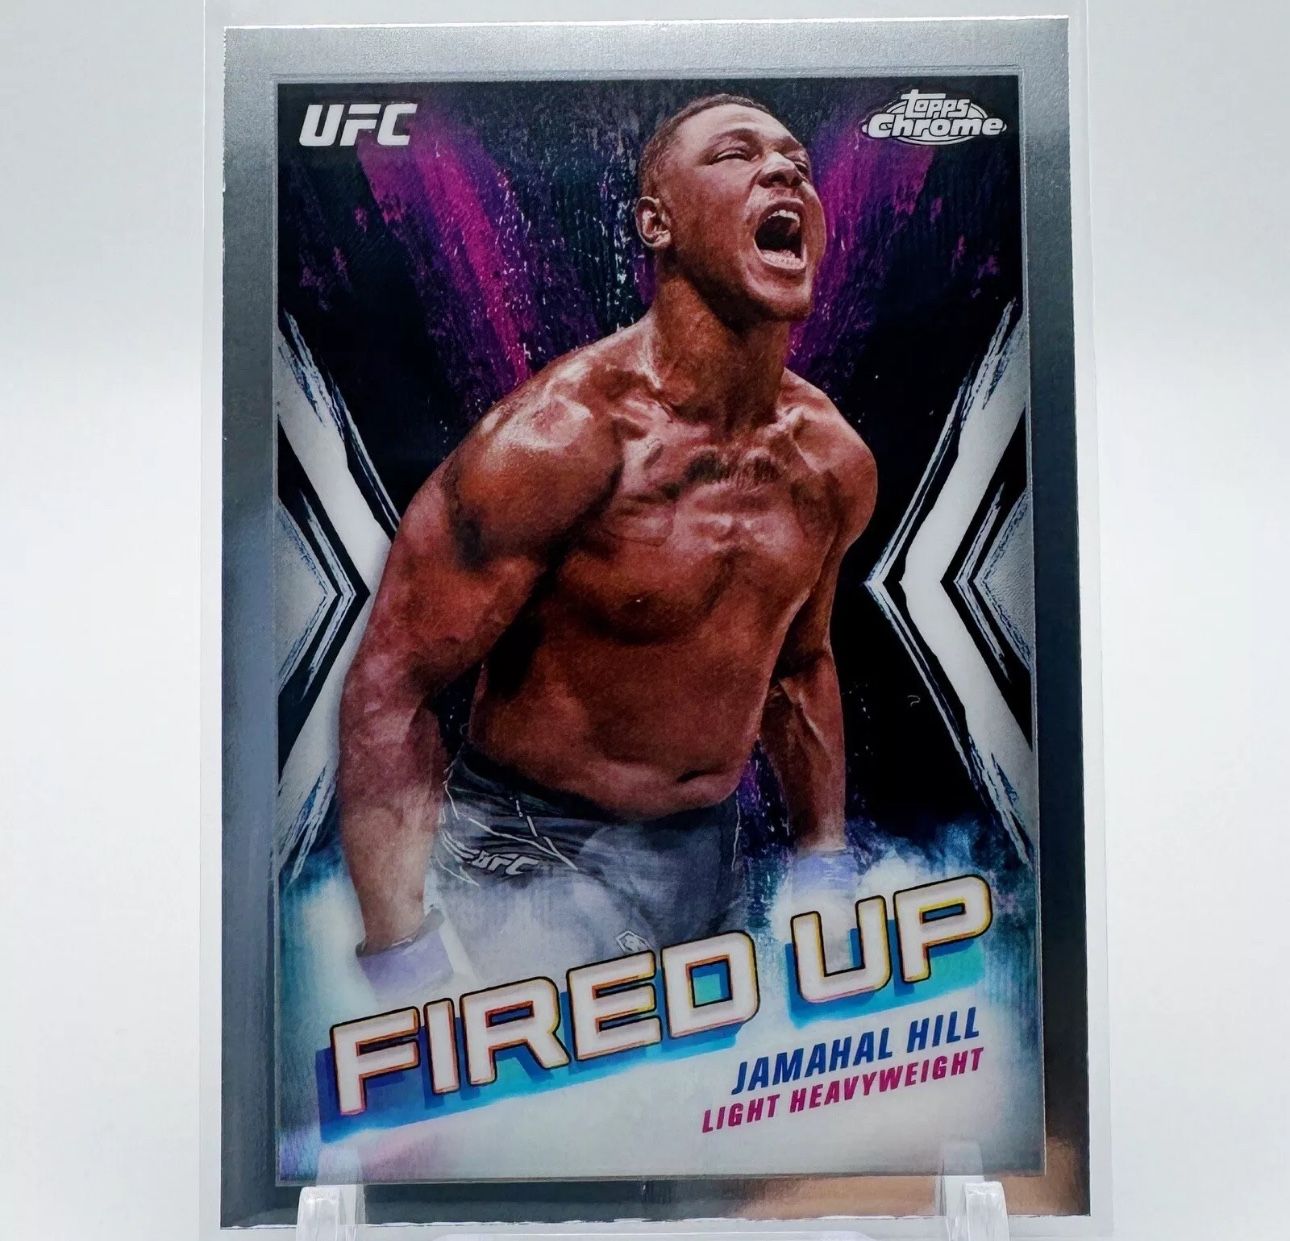 UFC FIRED UP JAMAHAL HILL UFC 300 FIGHTER MINT CONDITION TRADING CARD MENS FIGHTING 